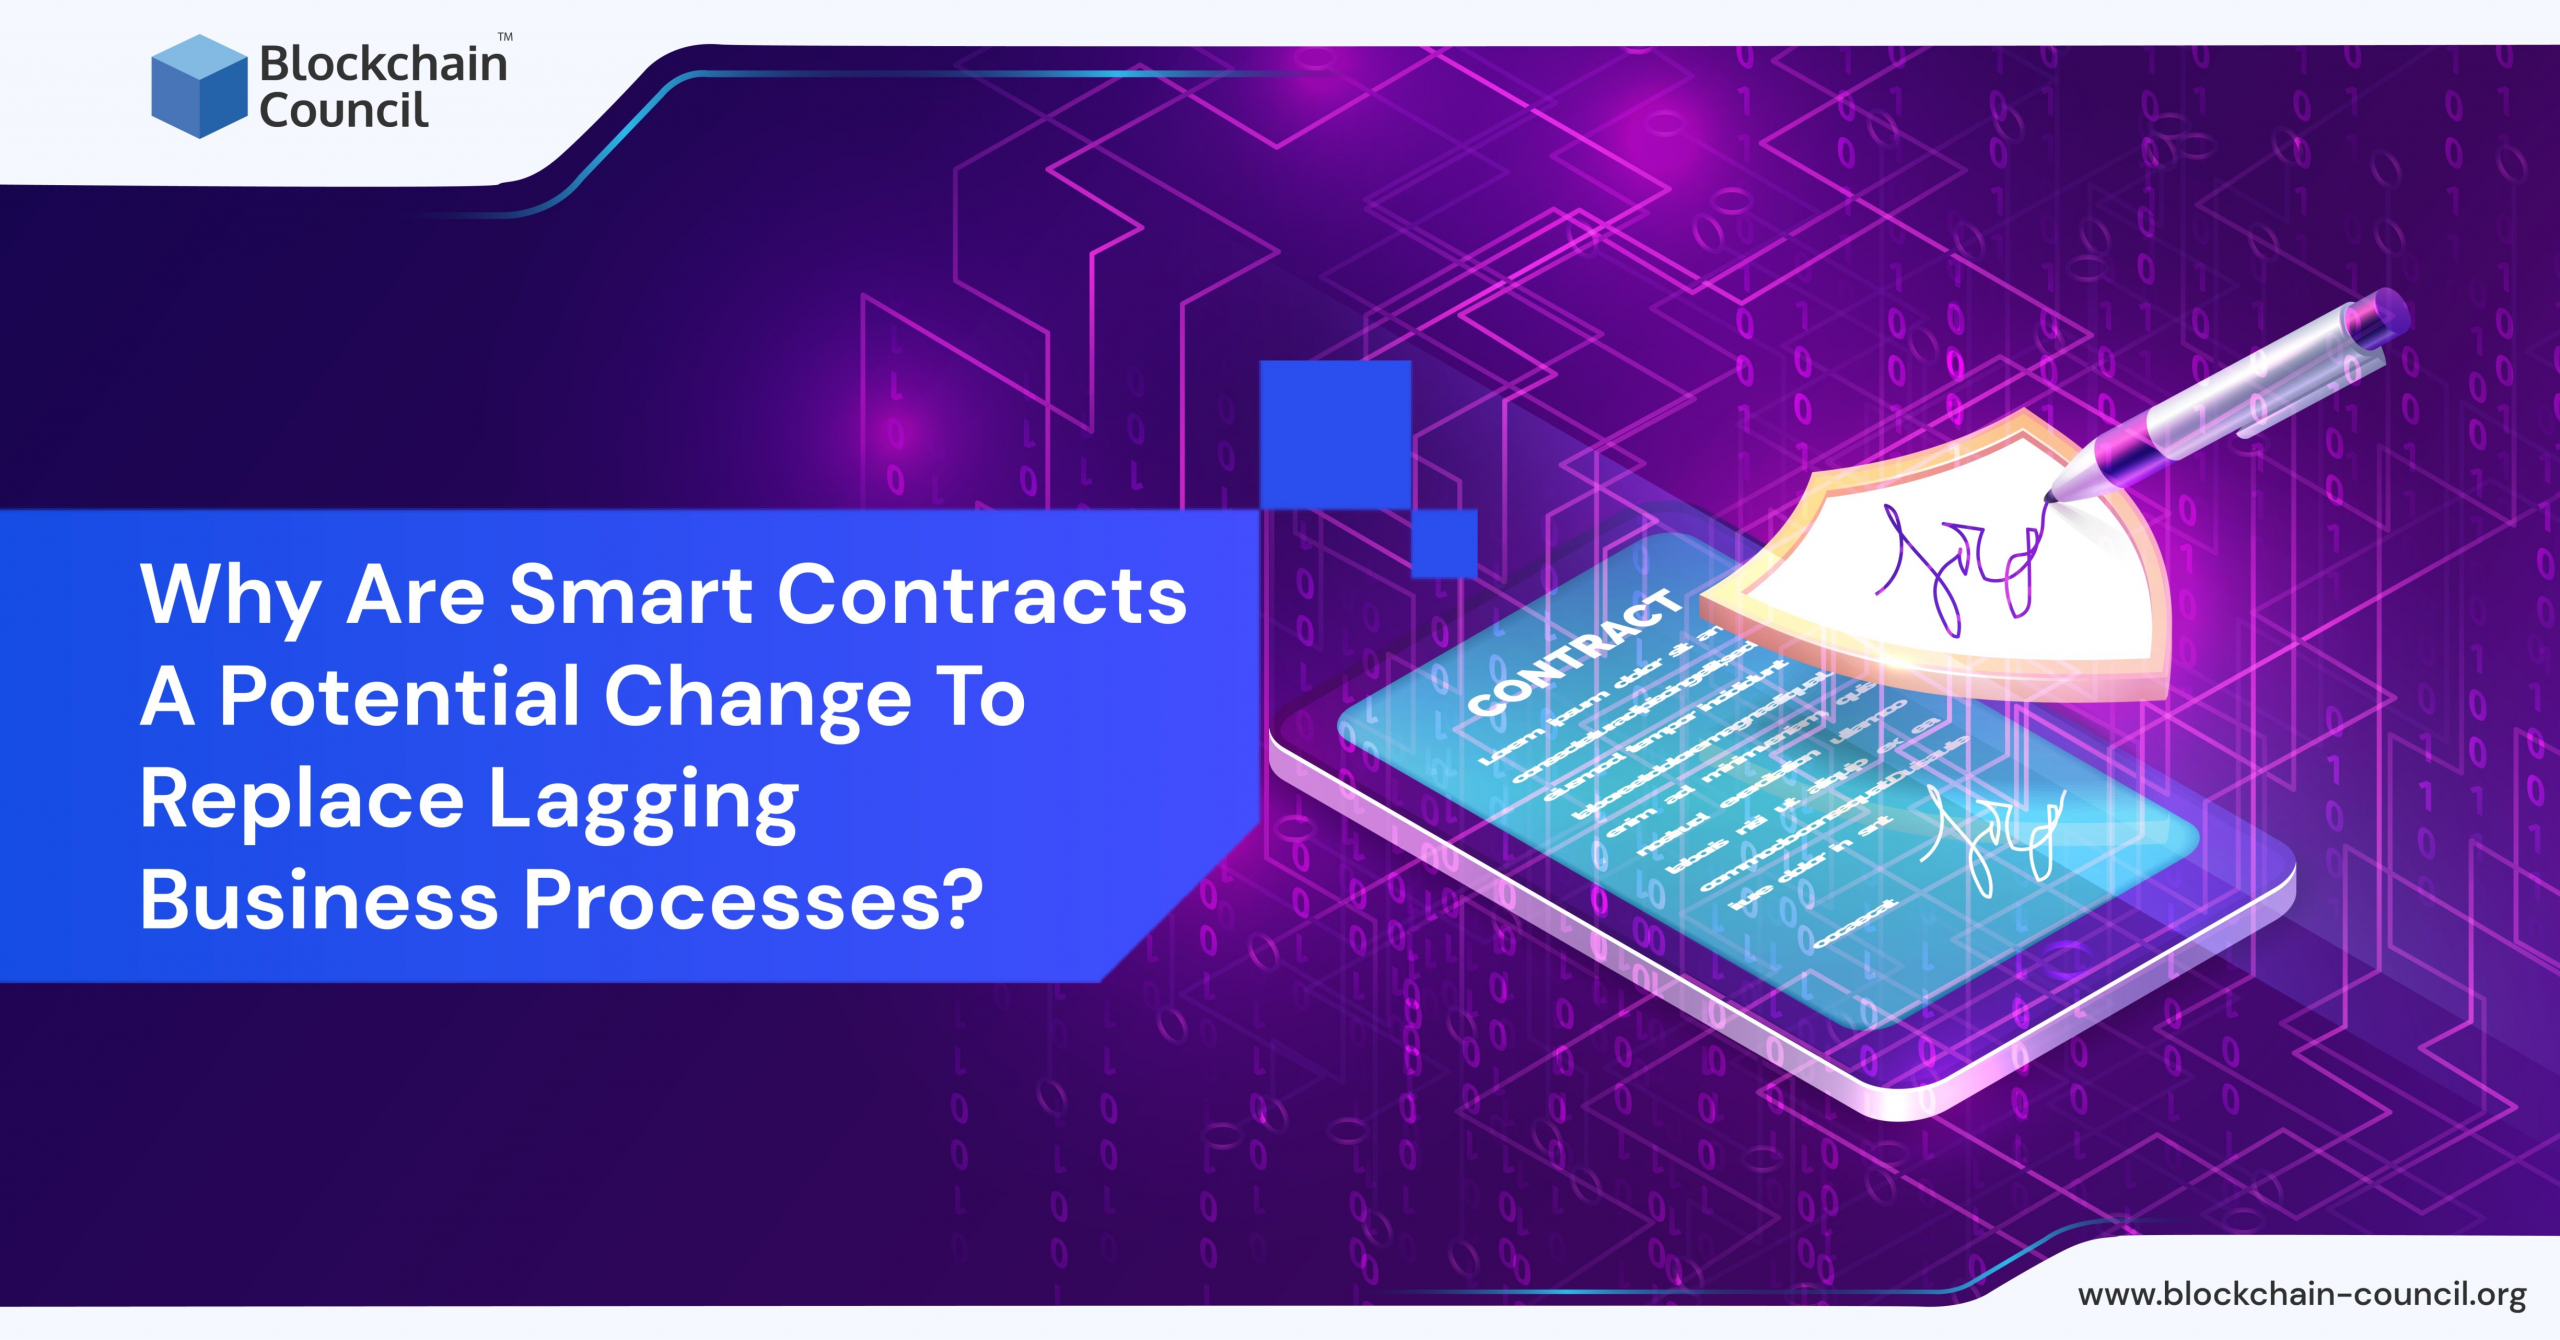 Why Are Smart Contracts A Potential Change To Replace Lagging Business Processes?